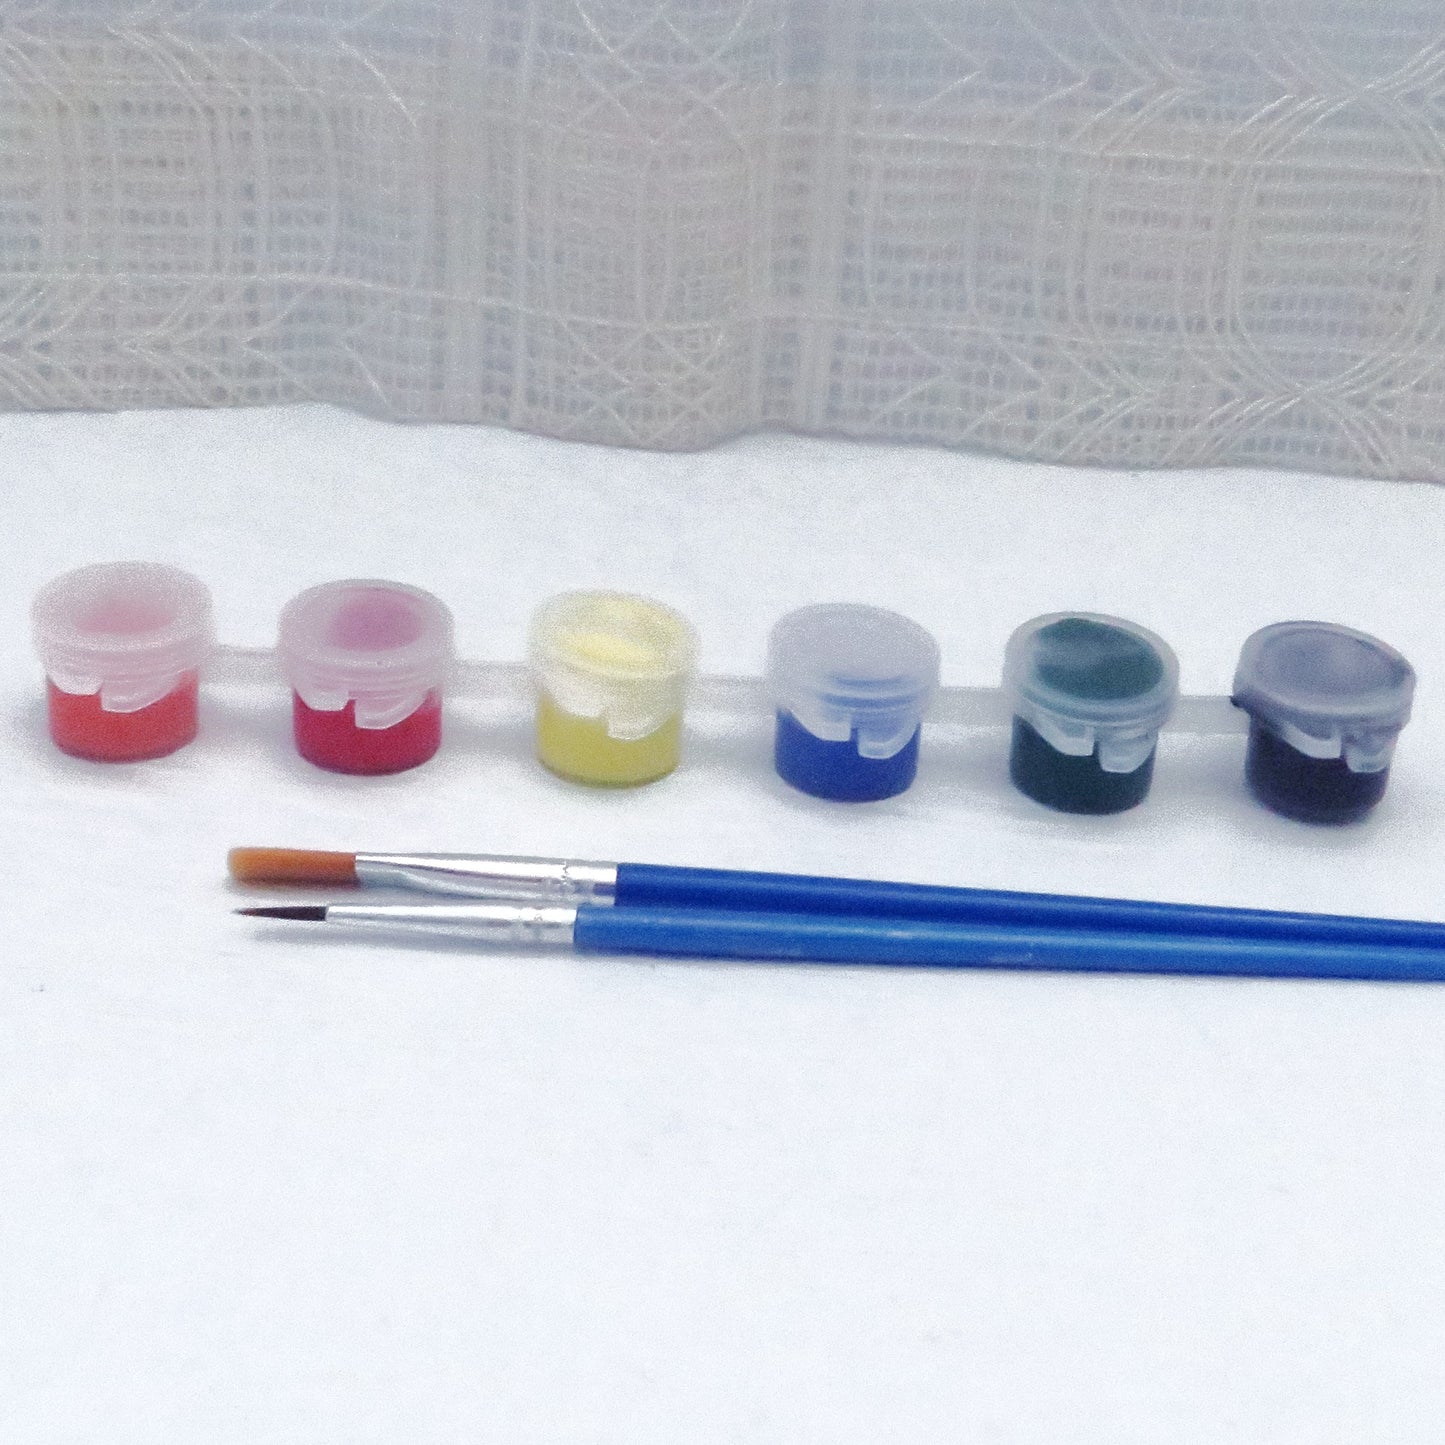 Set of 6 Acrylic Paints in Plastic Containers with 2 Round and Flat Paint Brushes